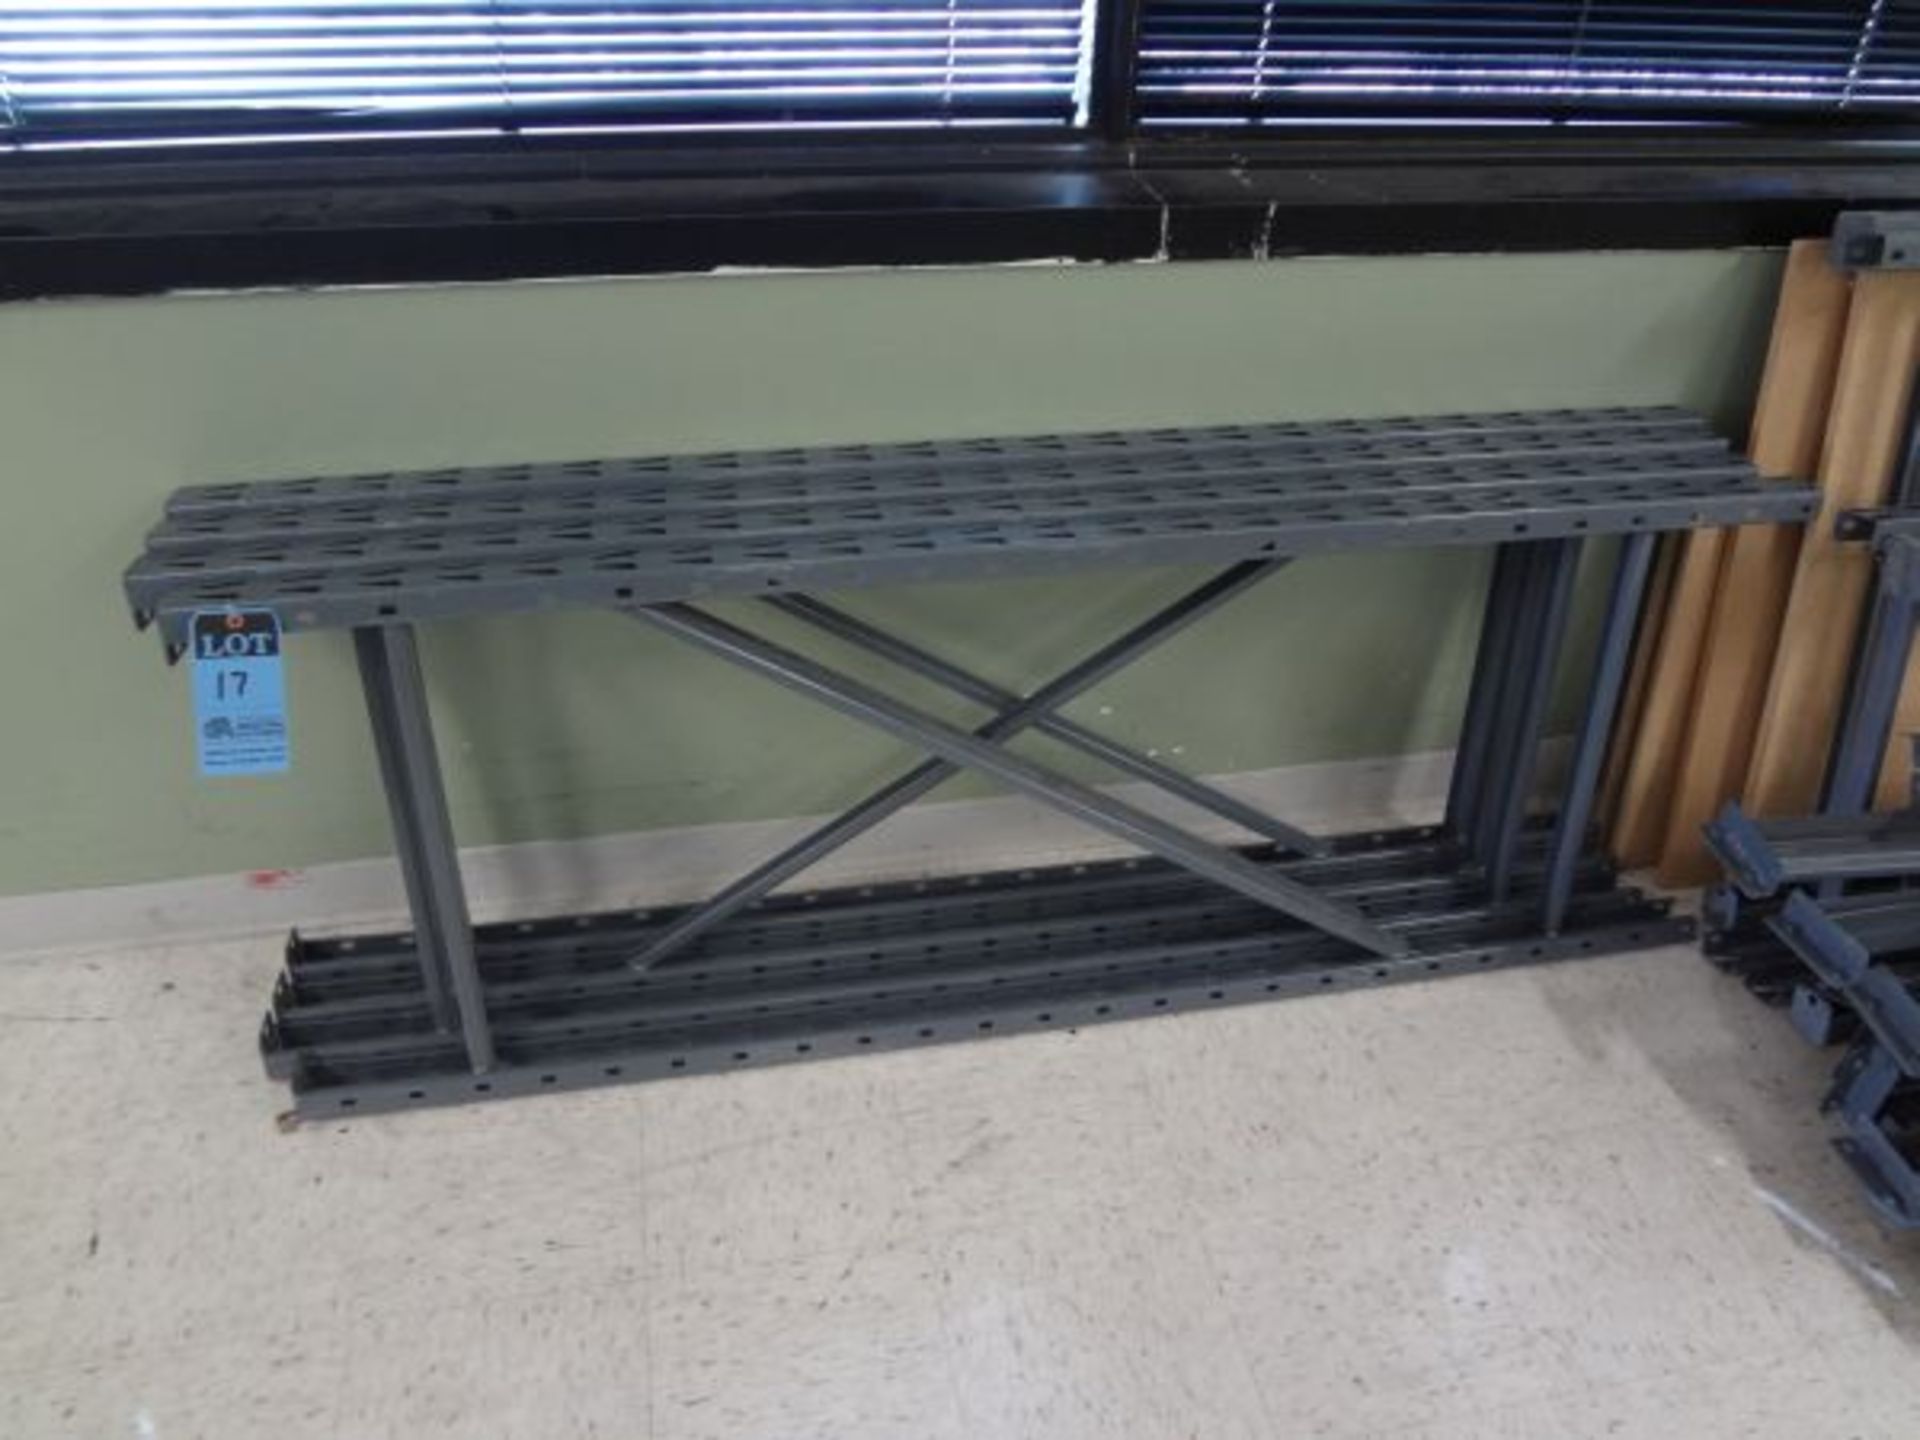 (LOT) (7) SECTIONS (1) 36" X 72" X 72" & (5) 24" X 72" X 72" ADJUSTABLE RACKS INCLUDING (2) 36" X - Image 2 of 4